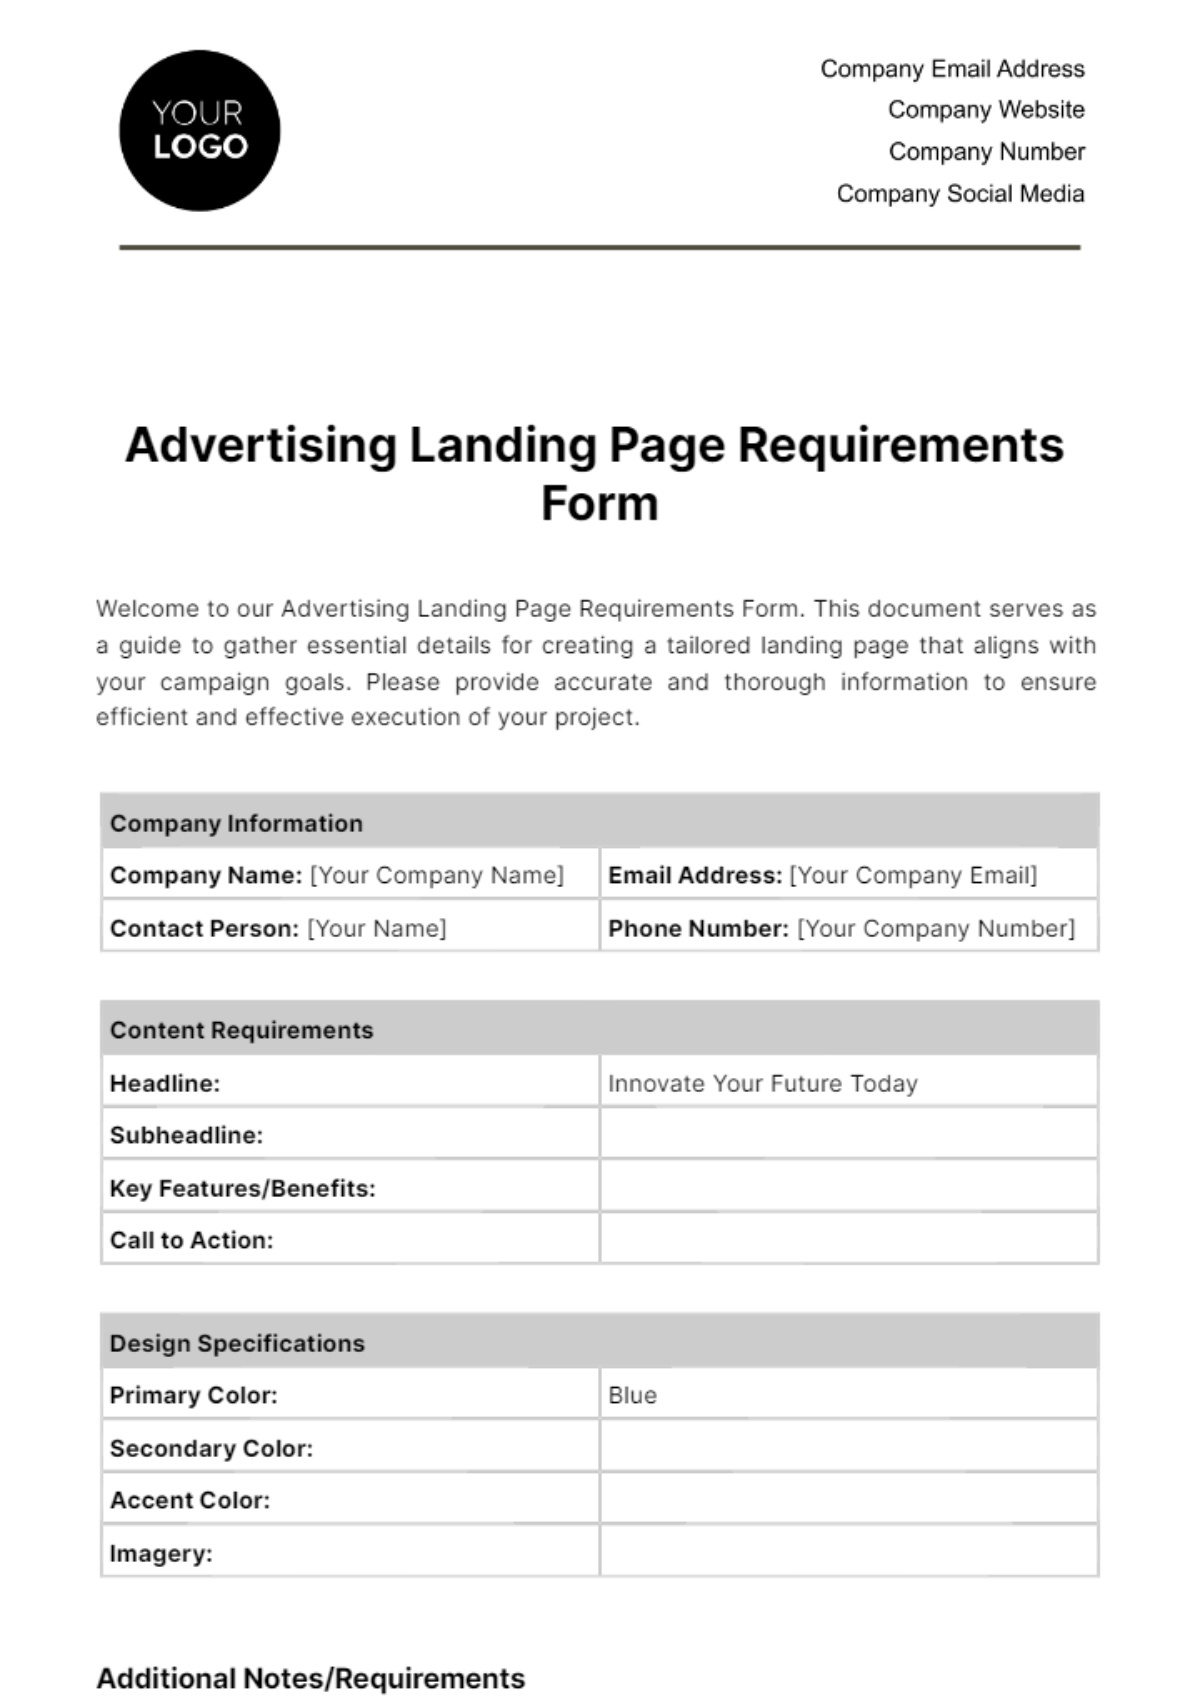 Free Advertising Landing Page Requirements Form Template